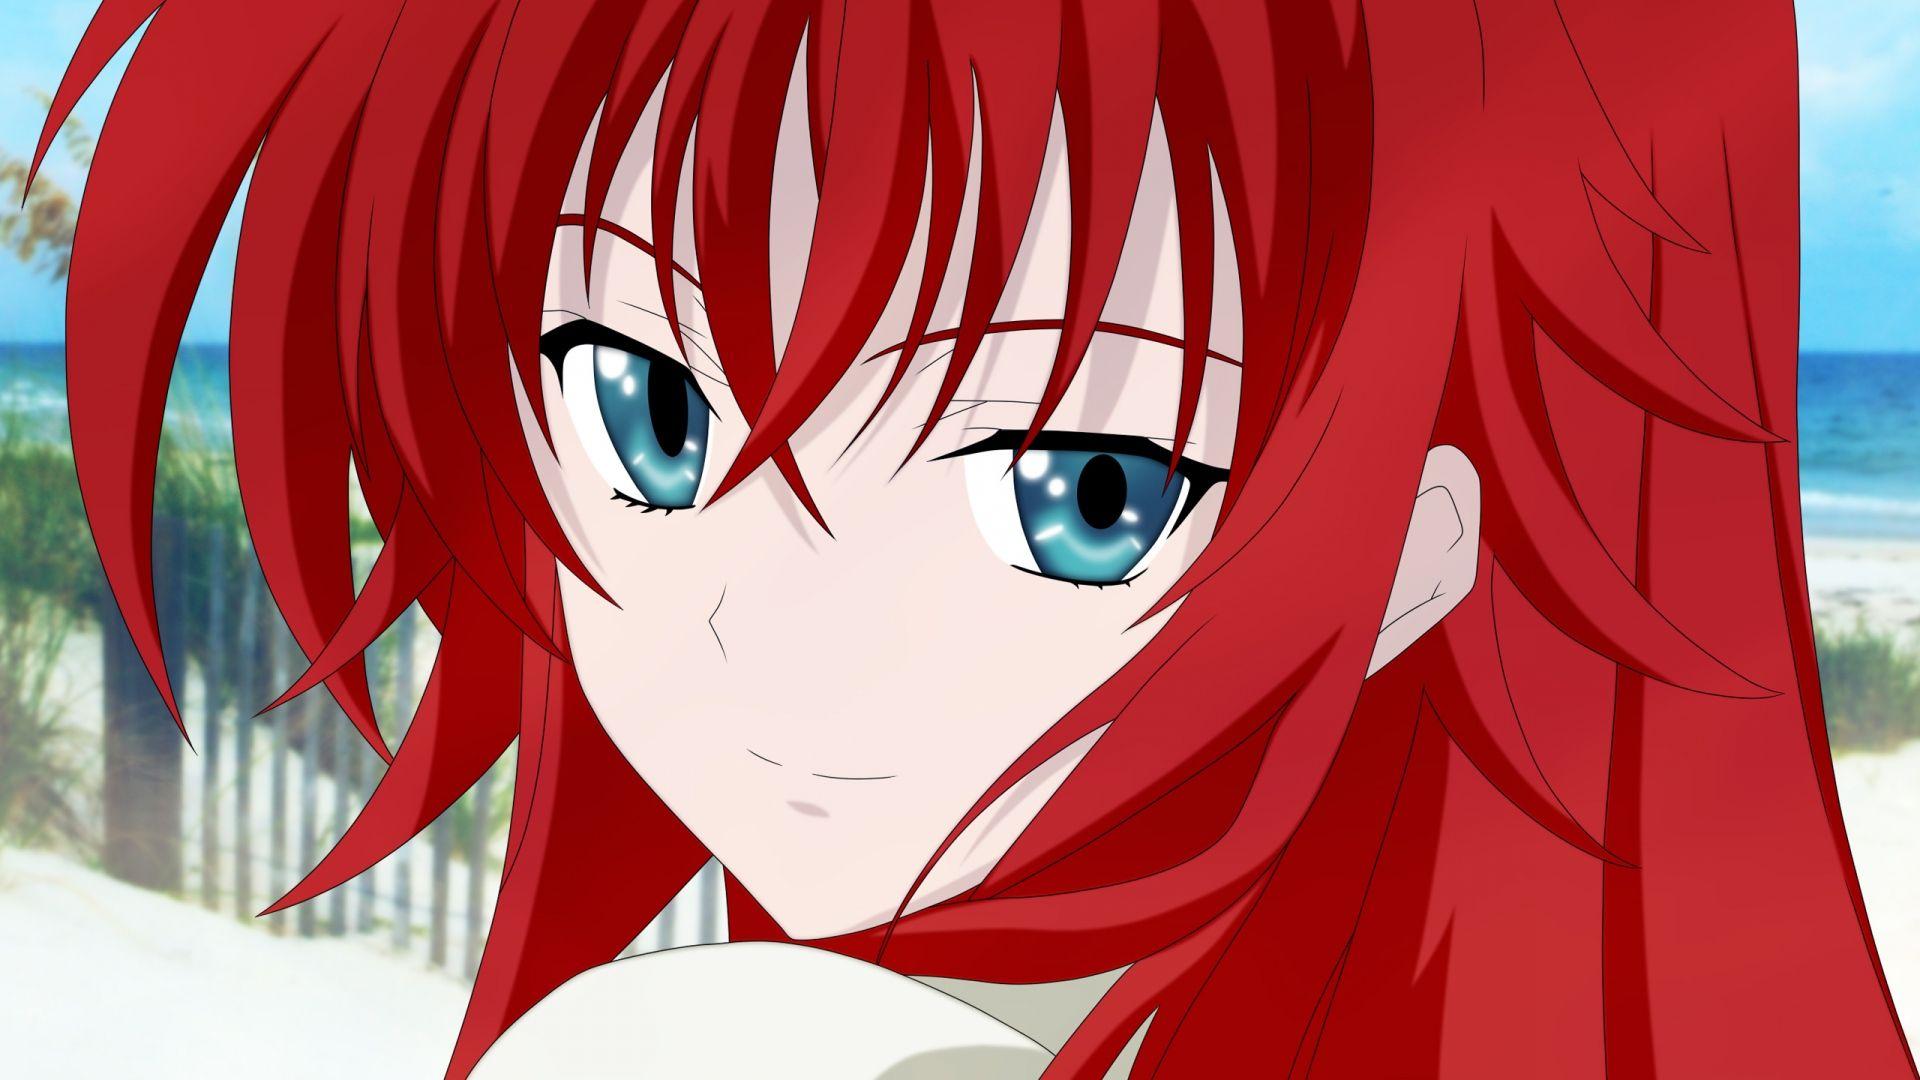 Download Wallpaper 1920x1080 Highschool dxd, Rias gremory, Girl